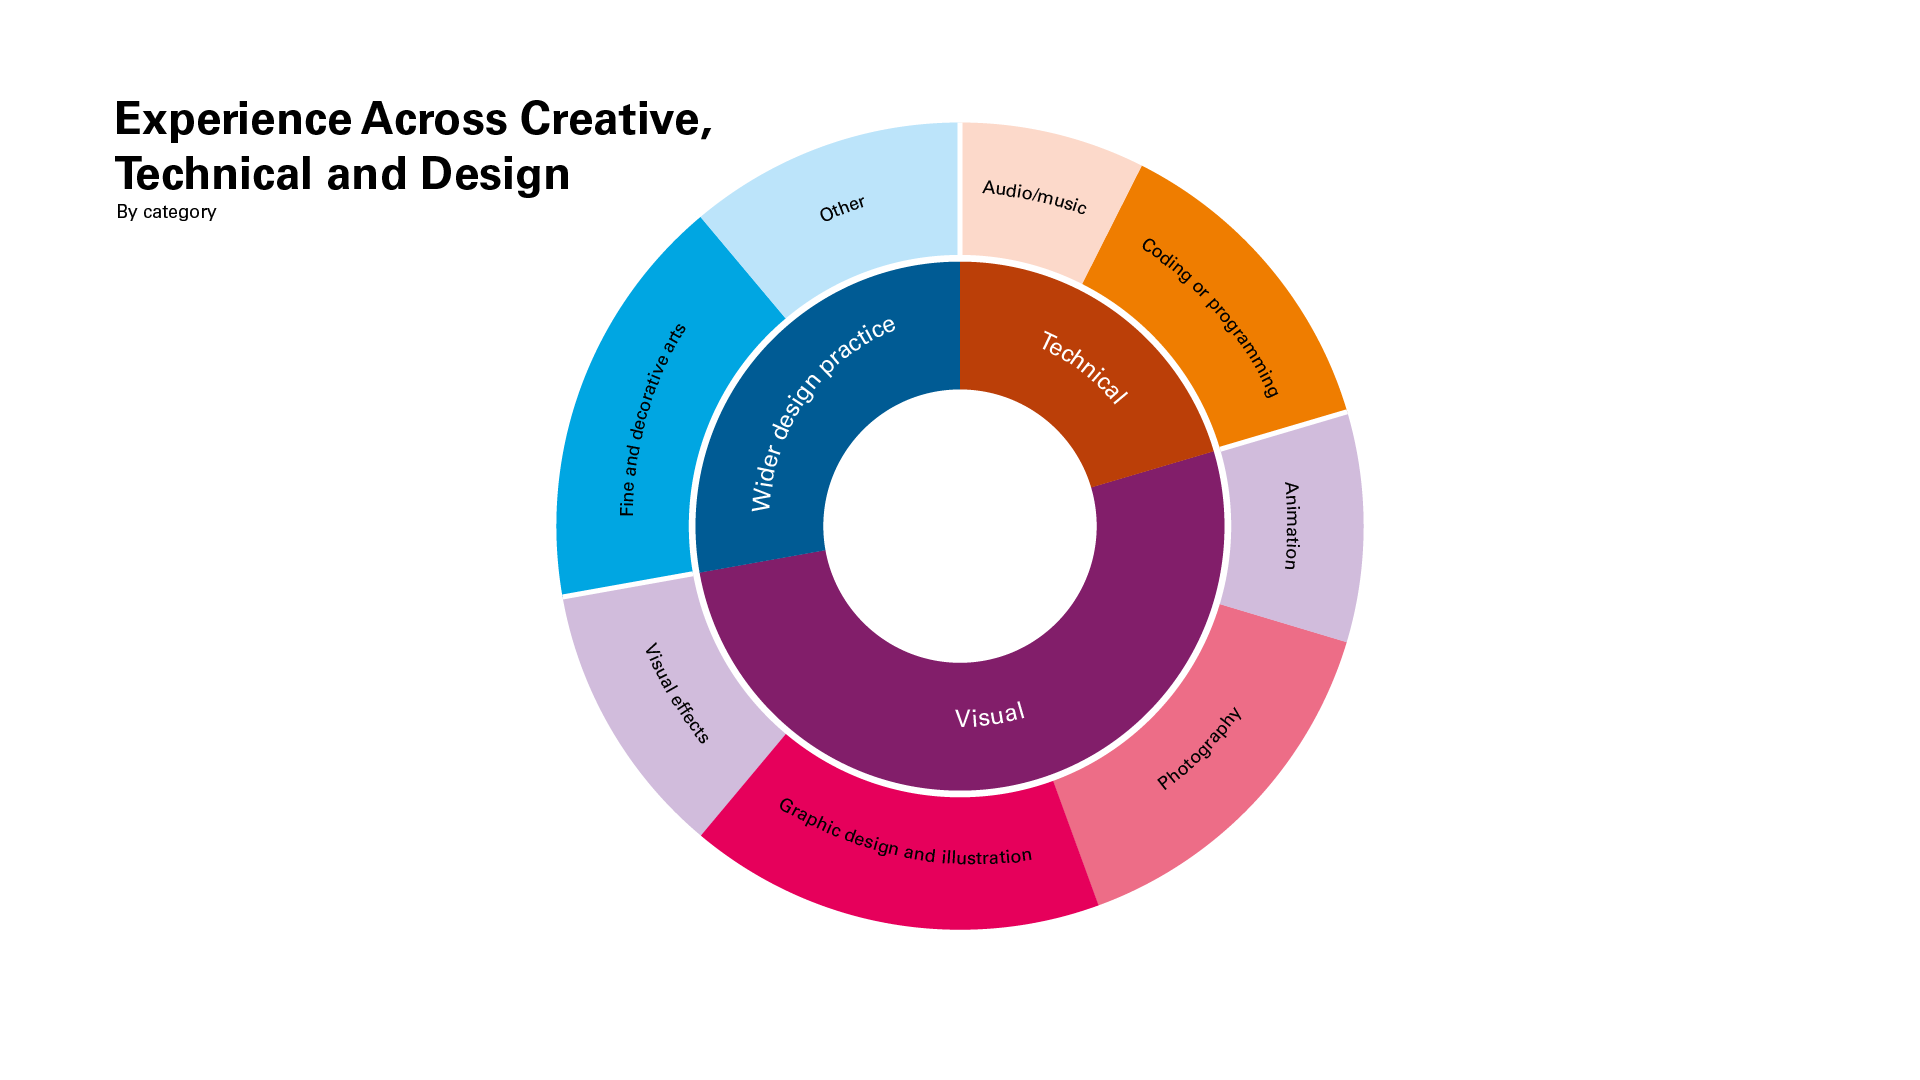 Data visualisation showing experience across creative, technical and design.